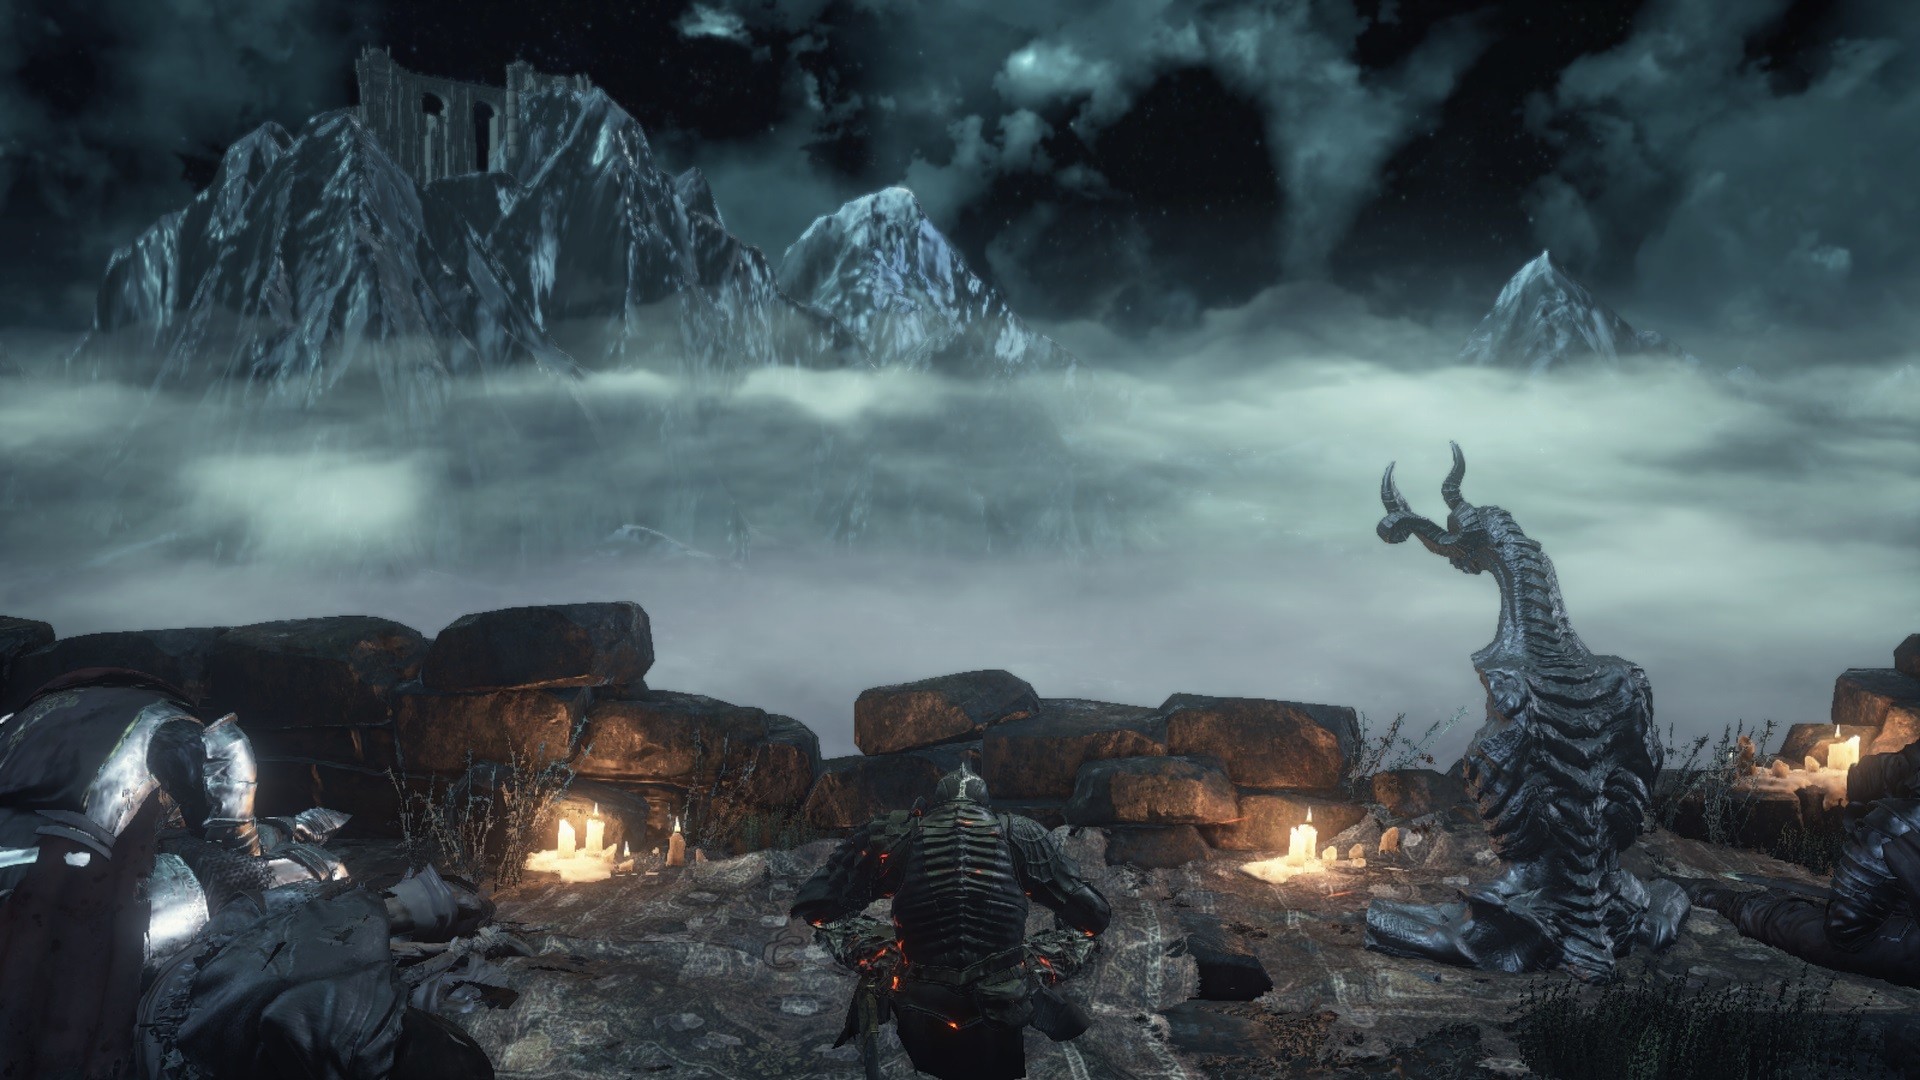 1920x1080 To access the other dragon stones, you must first obtain the Path of the  Dragon gesture in the Consumed King's Garden just outside of Lothric Castle.